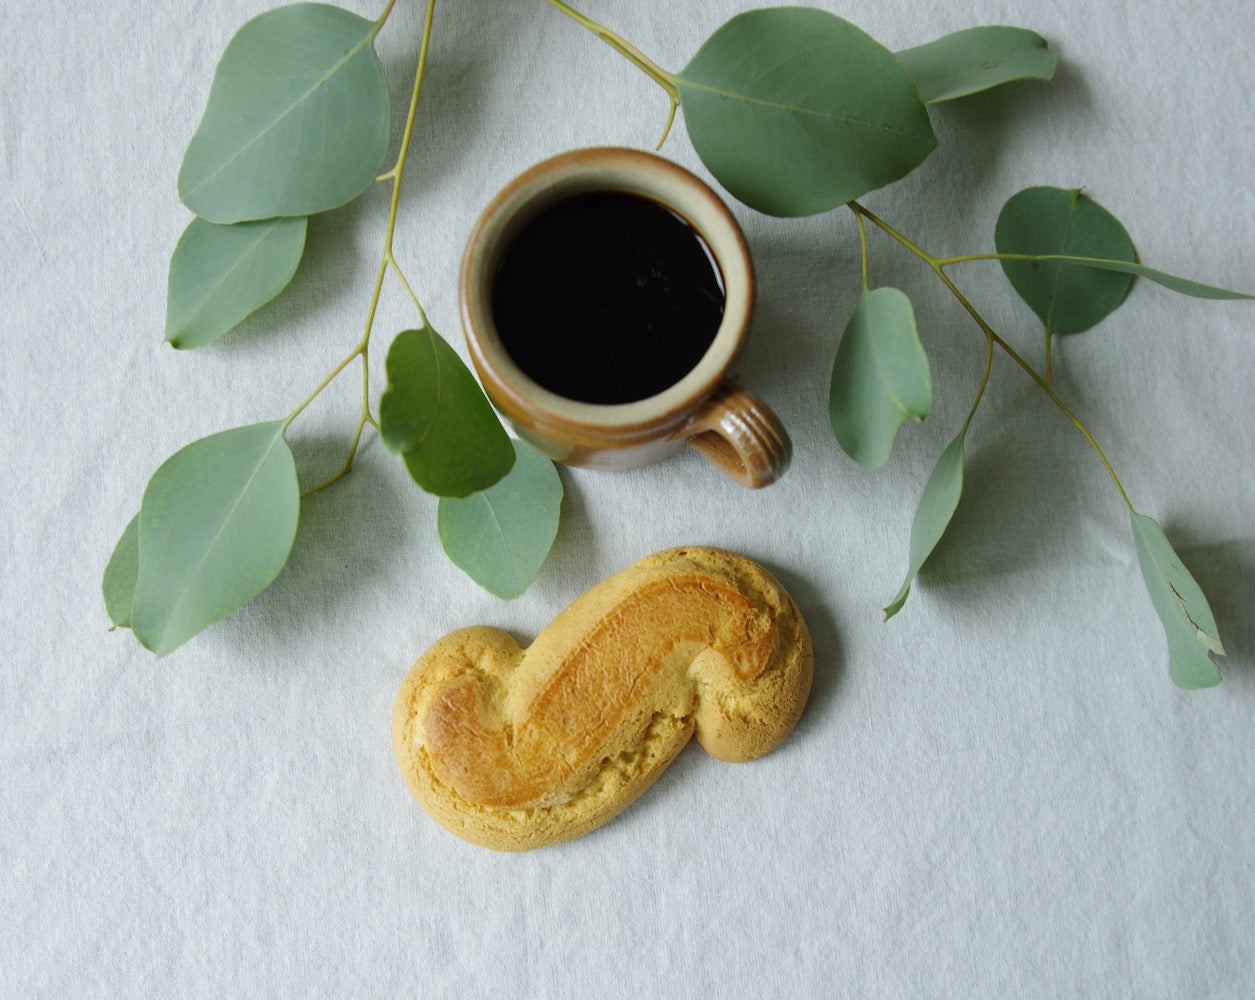 Brown mug next to pastry and eucalyptus leaves.